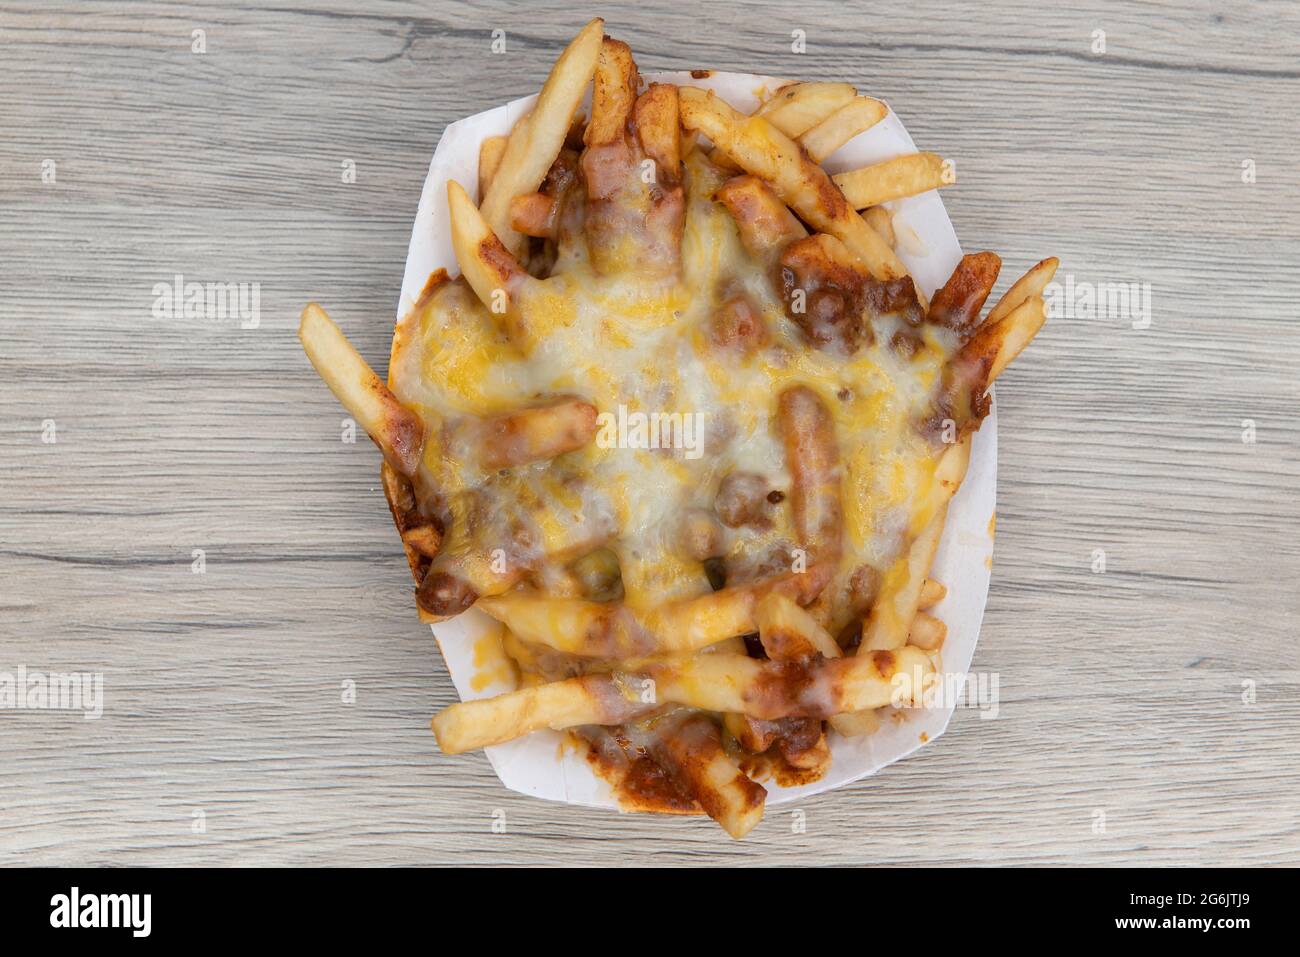 Overhead view of melted cheese smothers this entire boat of chile cheese french fries as a very filling side dish. Stock Photo